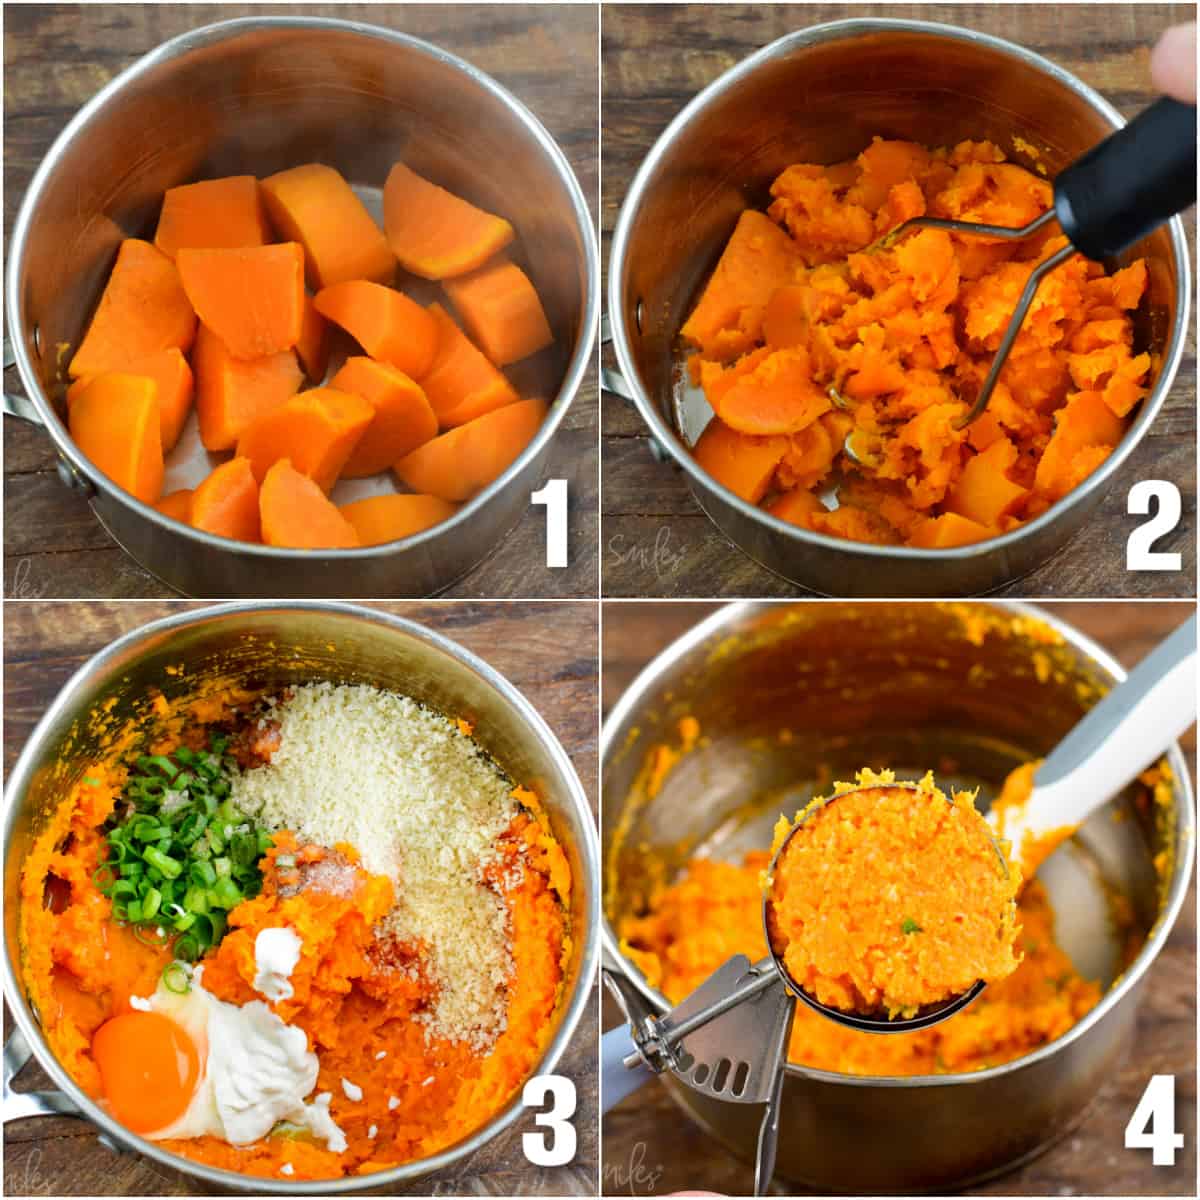 One image shows a pot that's halfway filled with cooked sweet potato chunks. They are being mashed in the second image. All of the other ingredients are added to the potatoes in the third image. In the fourth image, a scoop of the potato mixture is lifted from the pot. 